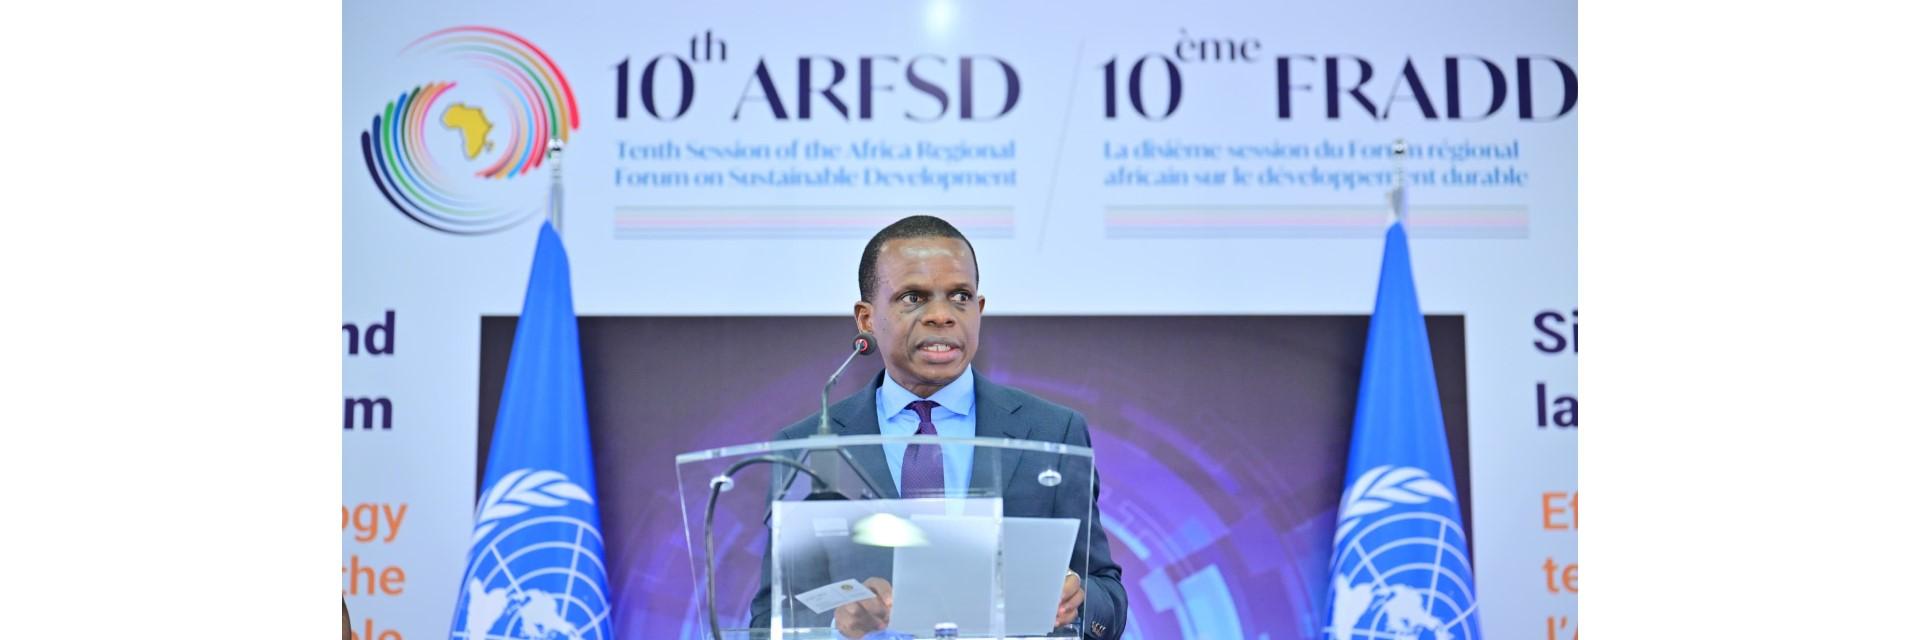 Statement by Mr. Antonio Pedro at the Africa Regional Science, Technology and Innovation Forum for Sustainable Development